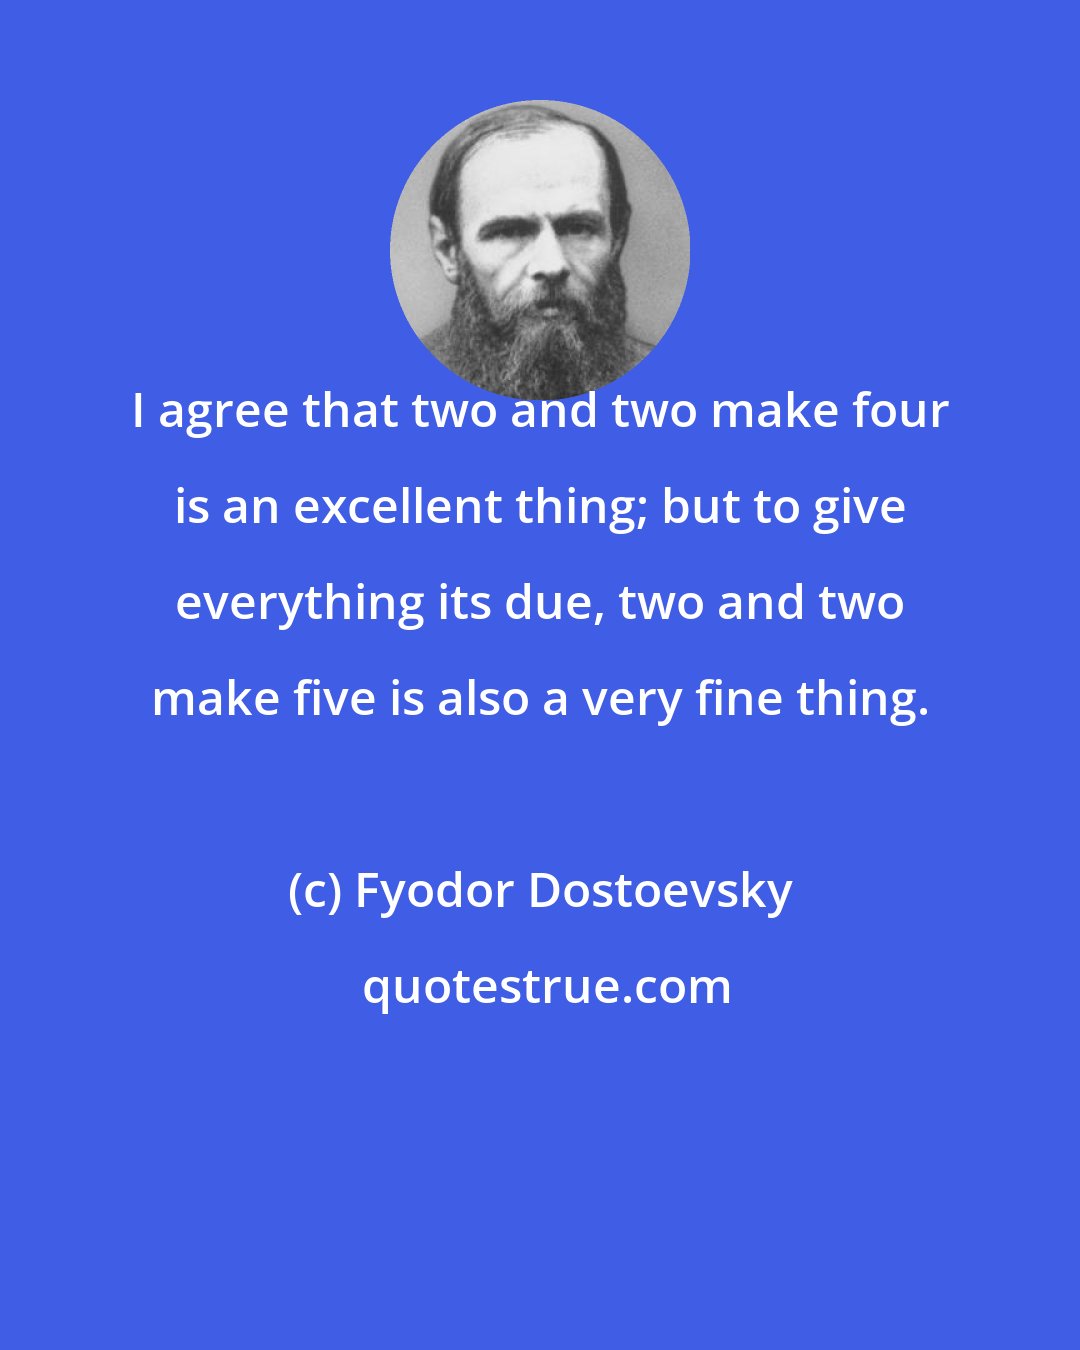 Fyodor Dostoevsky: I agree that two and two make four is an excellent thing; but to give everything its due, two and two make five is also a very fine thing.